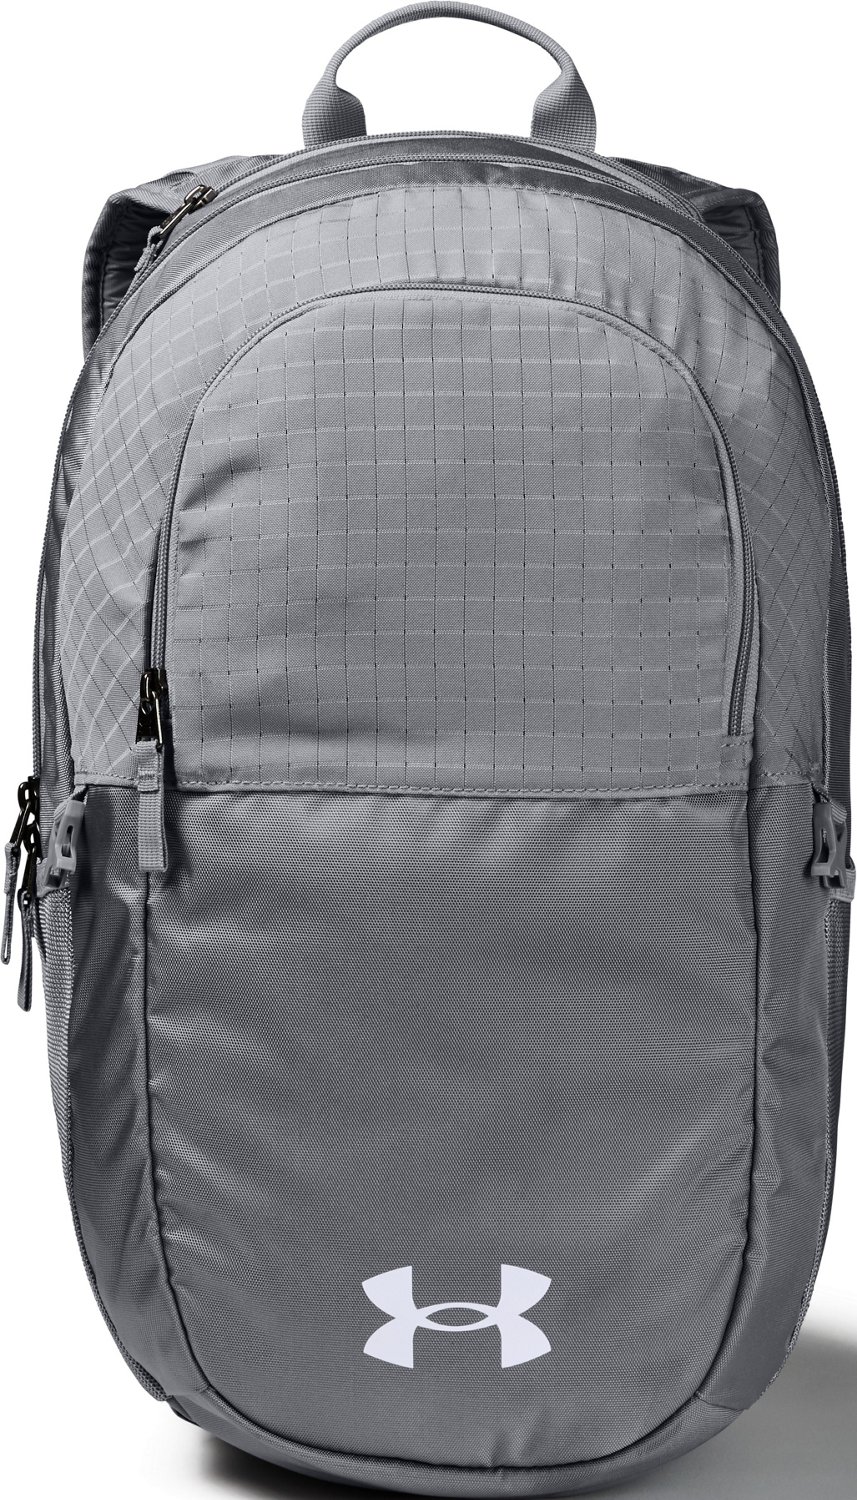 Under Armour Soccer Backpack | Free Shipping at Academy